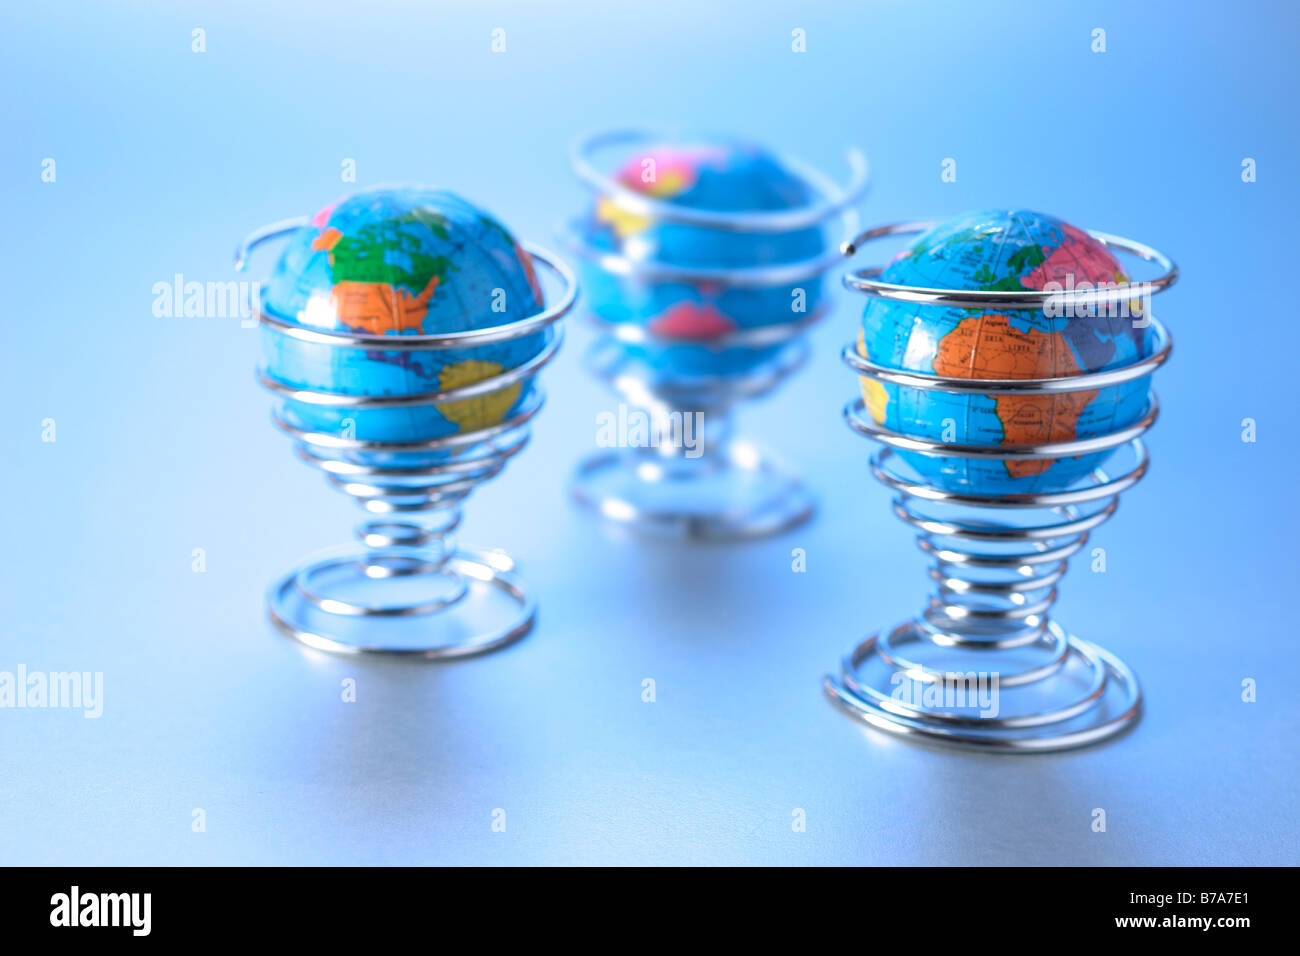 Miniature globes in egg cups Stock Photo